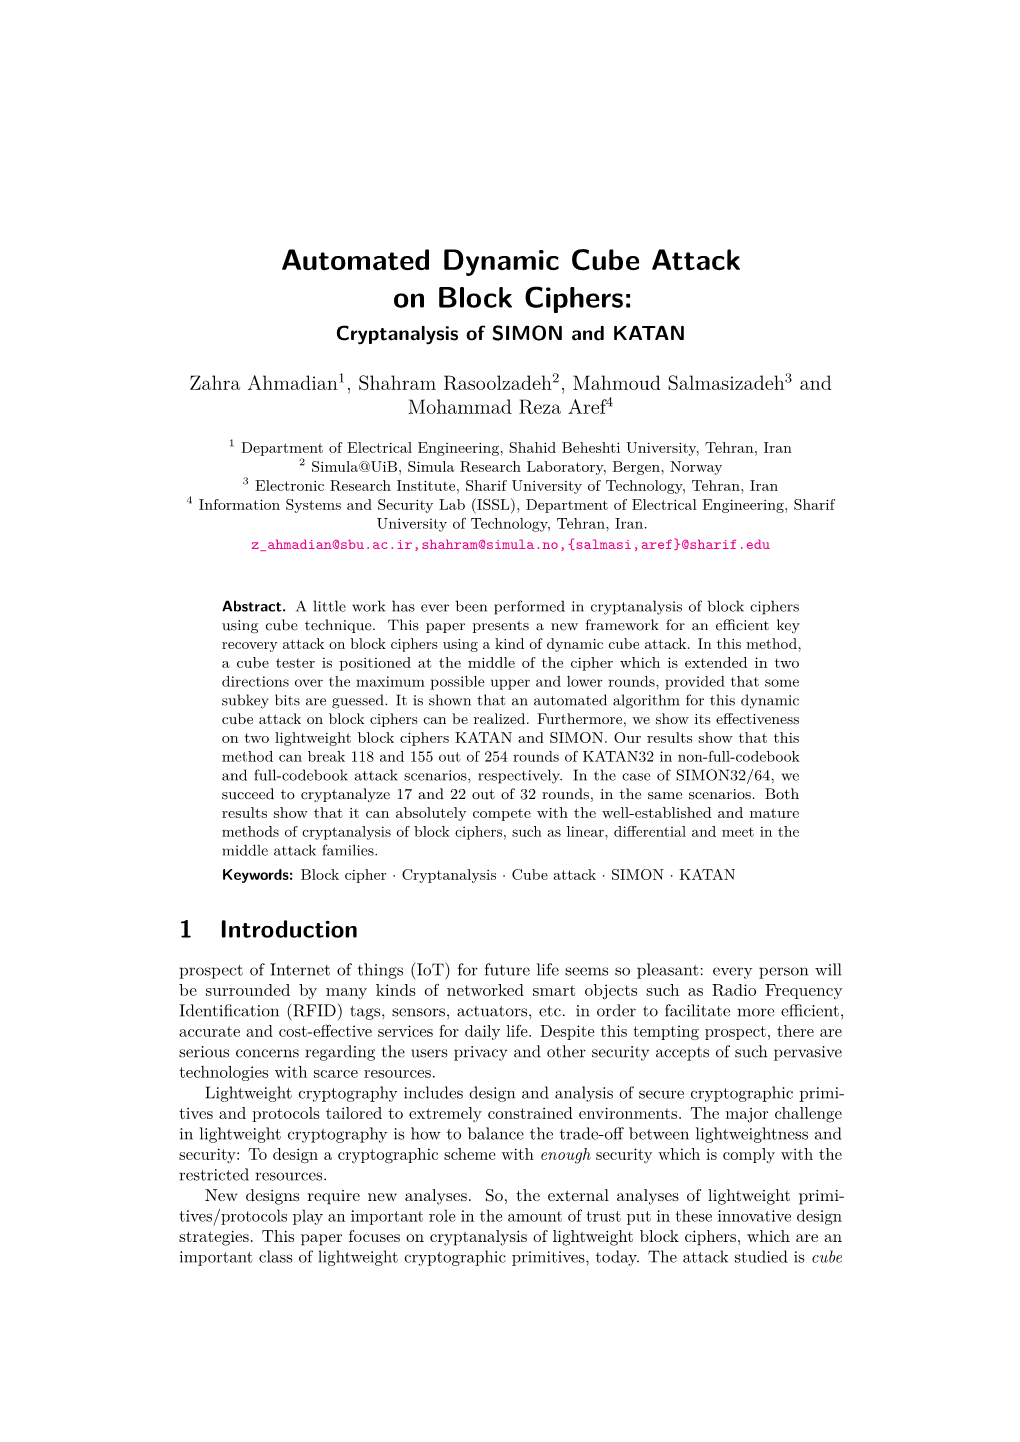 Automated Dynamic Cube Attack on Block Ciphers: Cryptanalysis of SIMON and KATAN